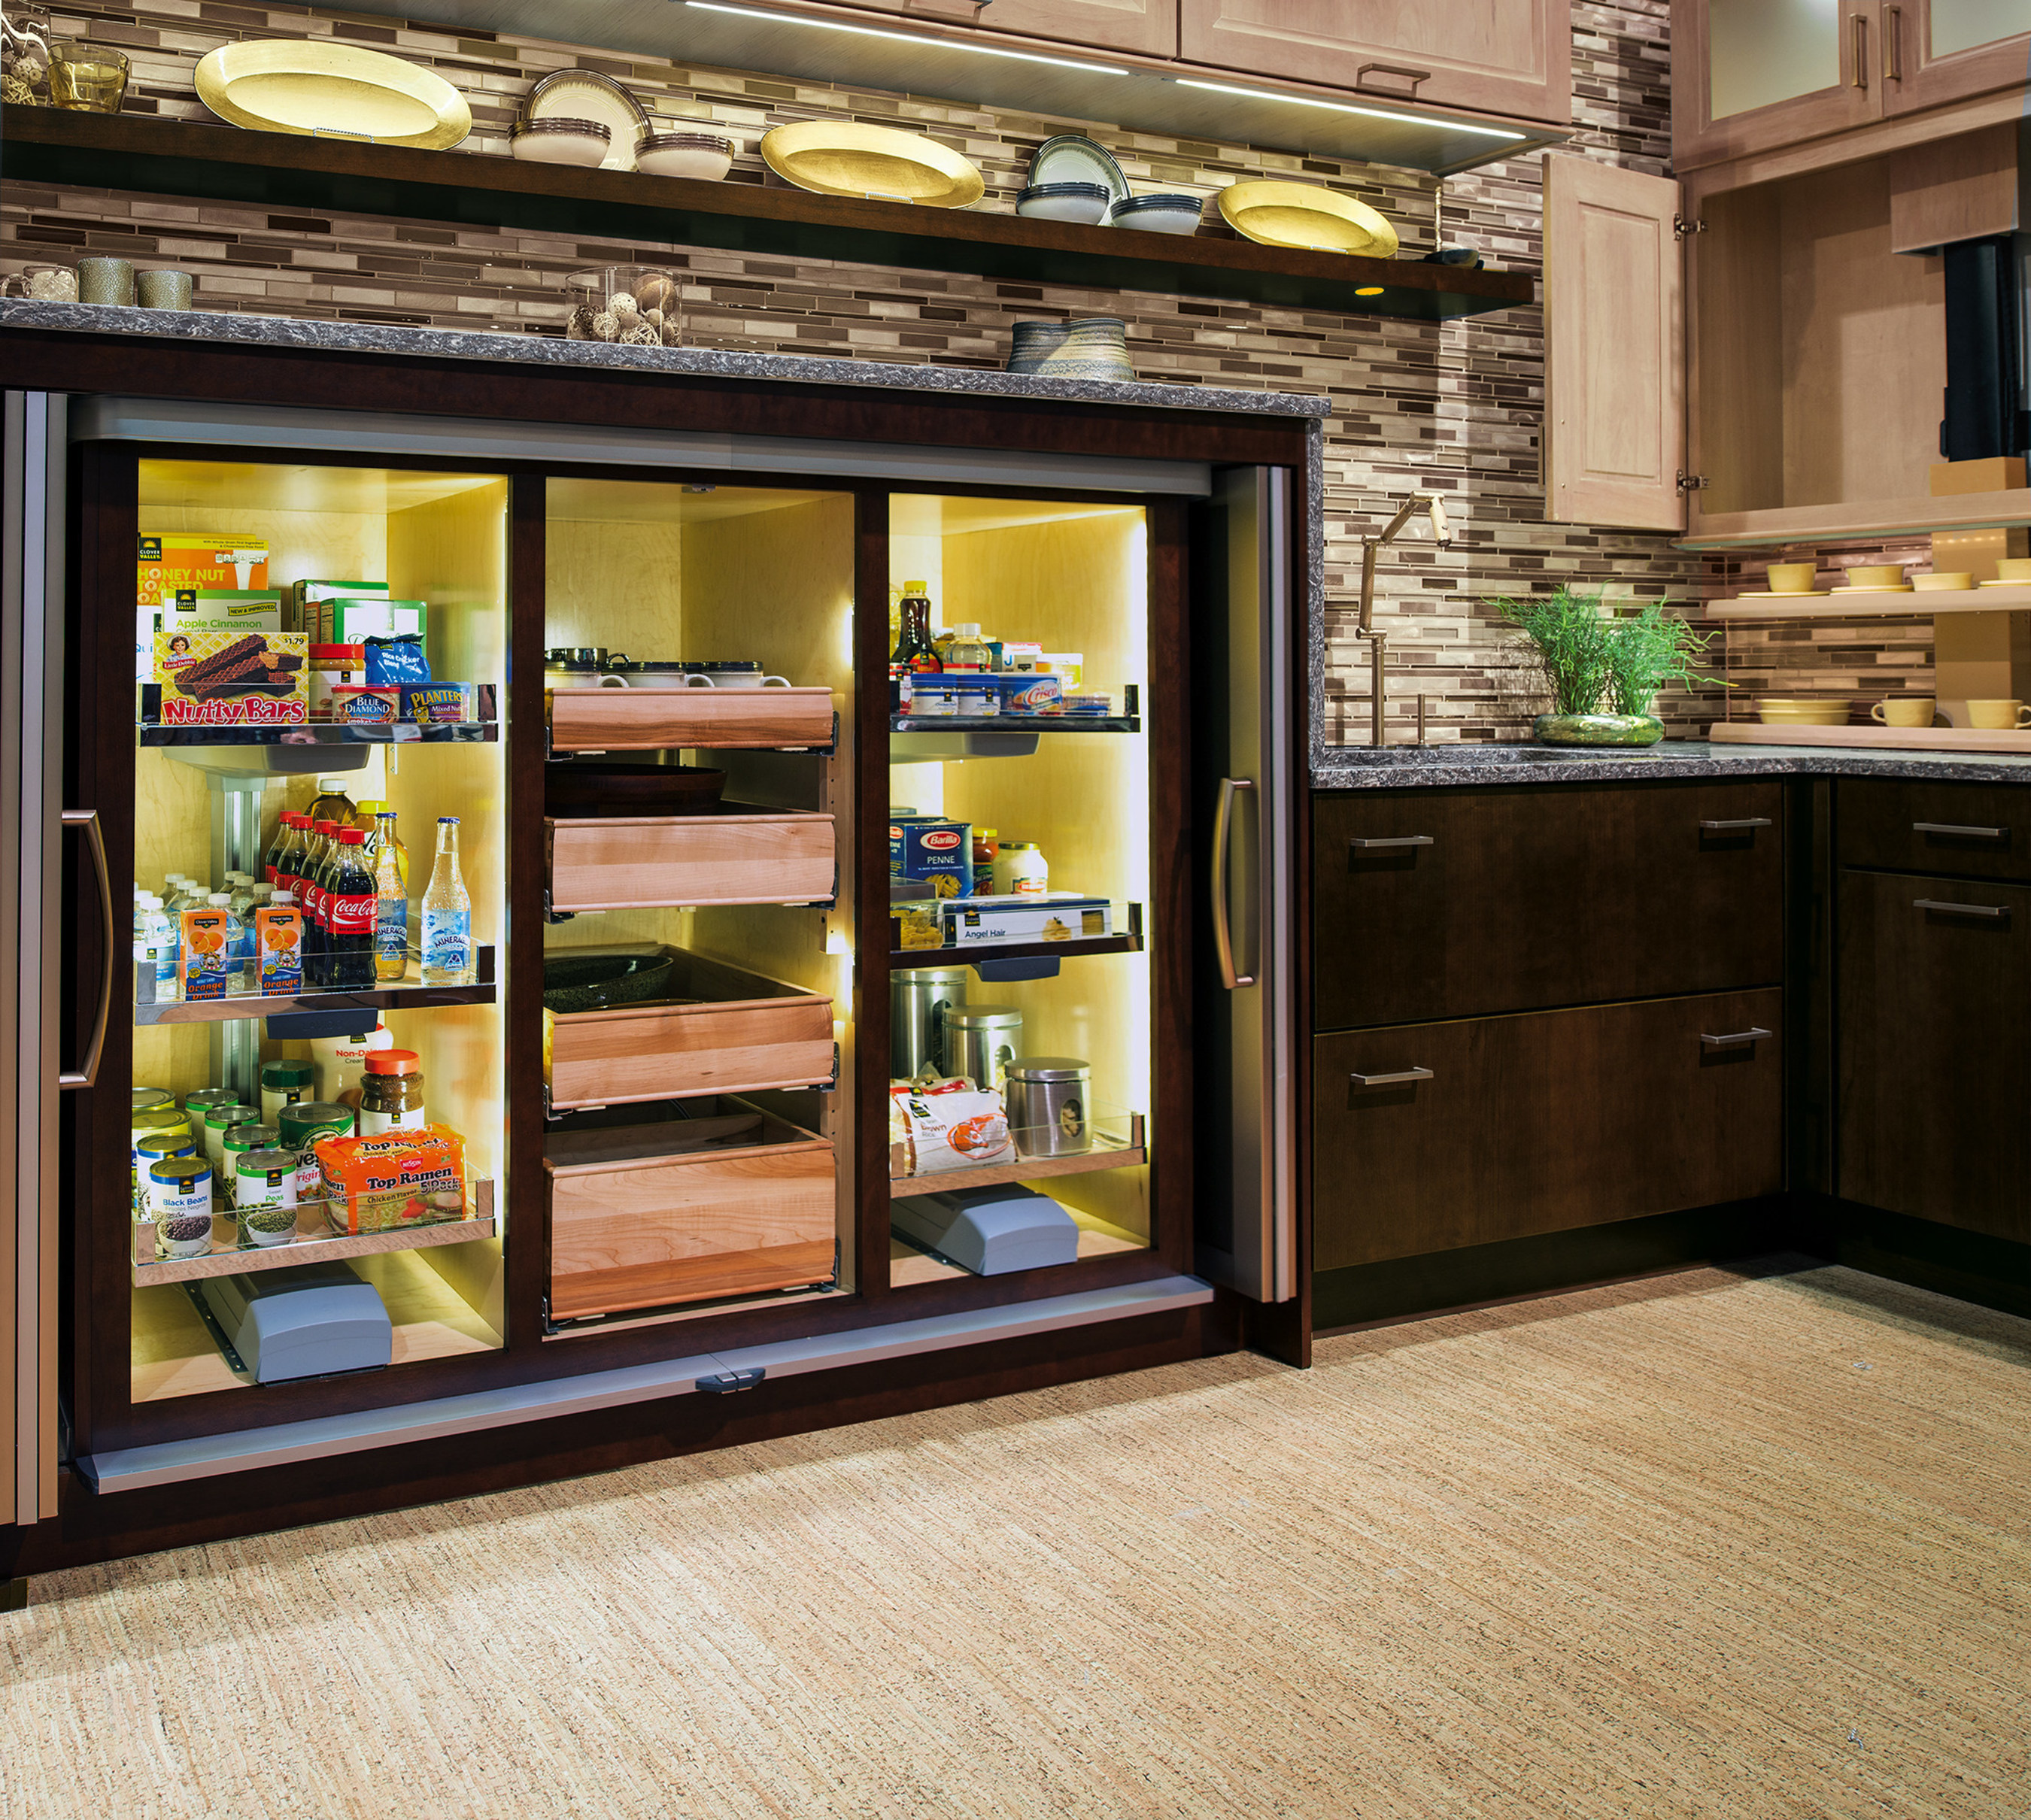 Wellborn Cabinet Inc Introduces You Draw It To Premier Series